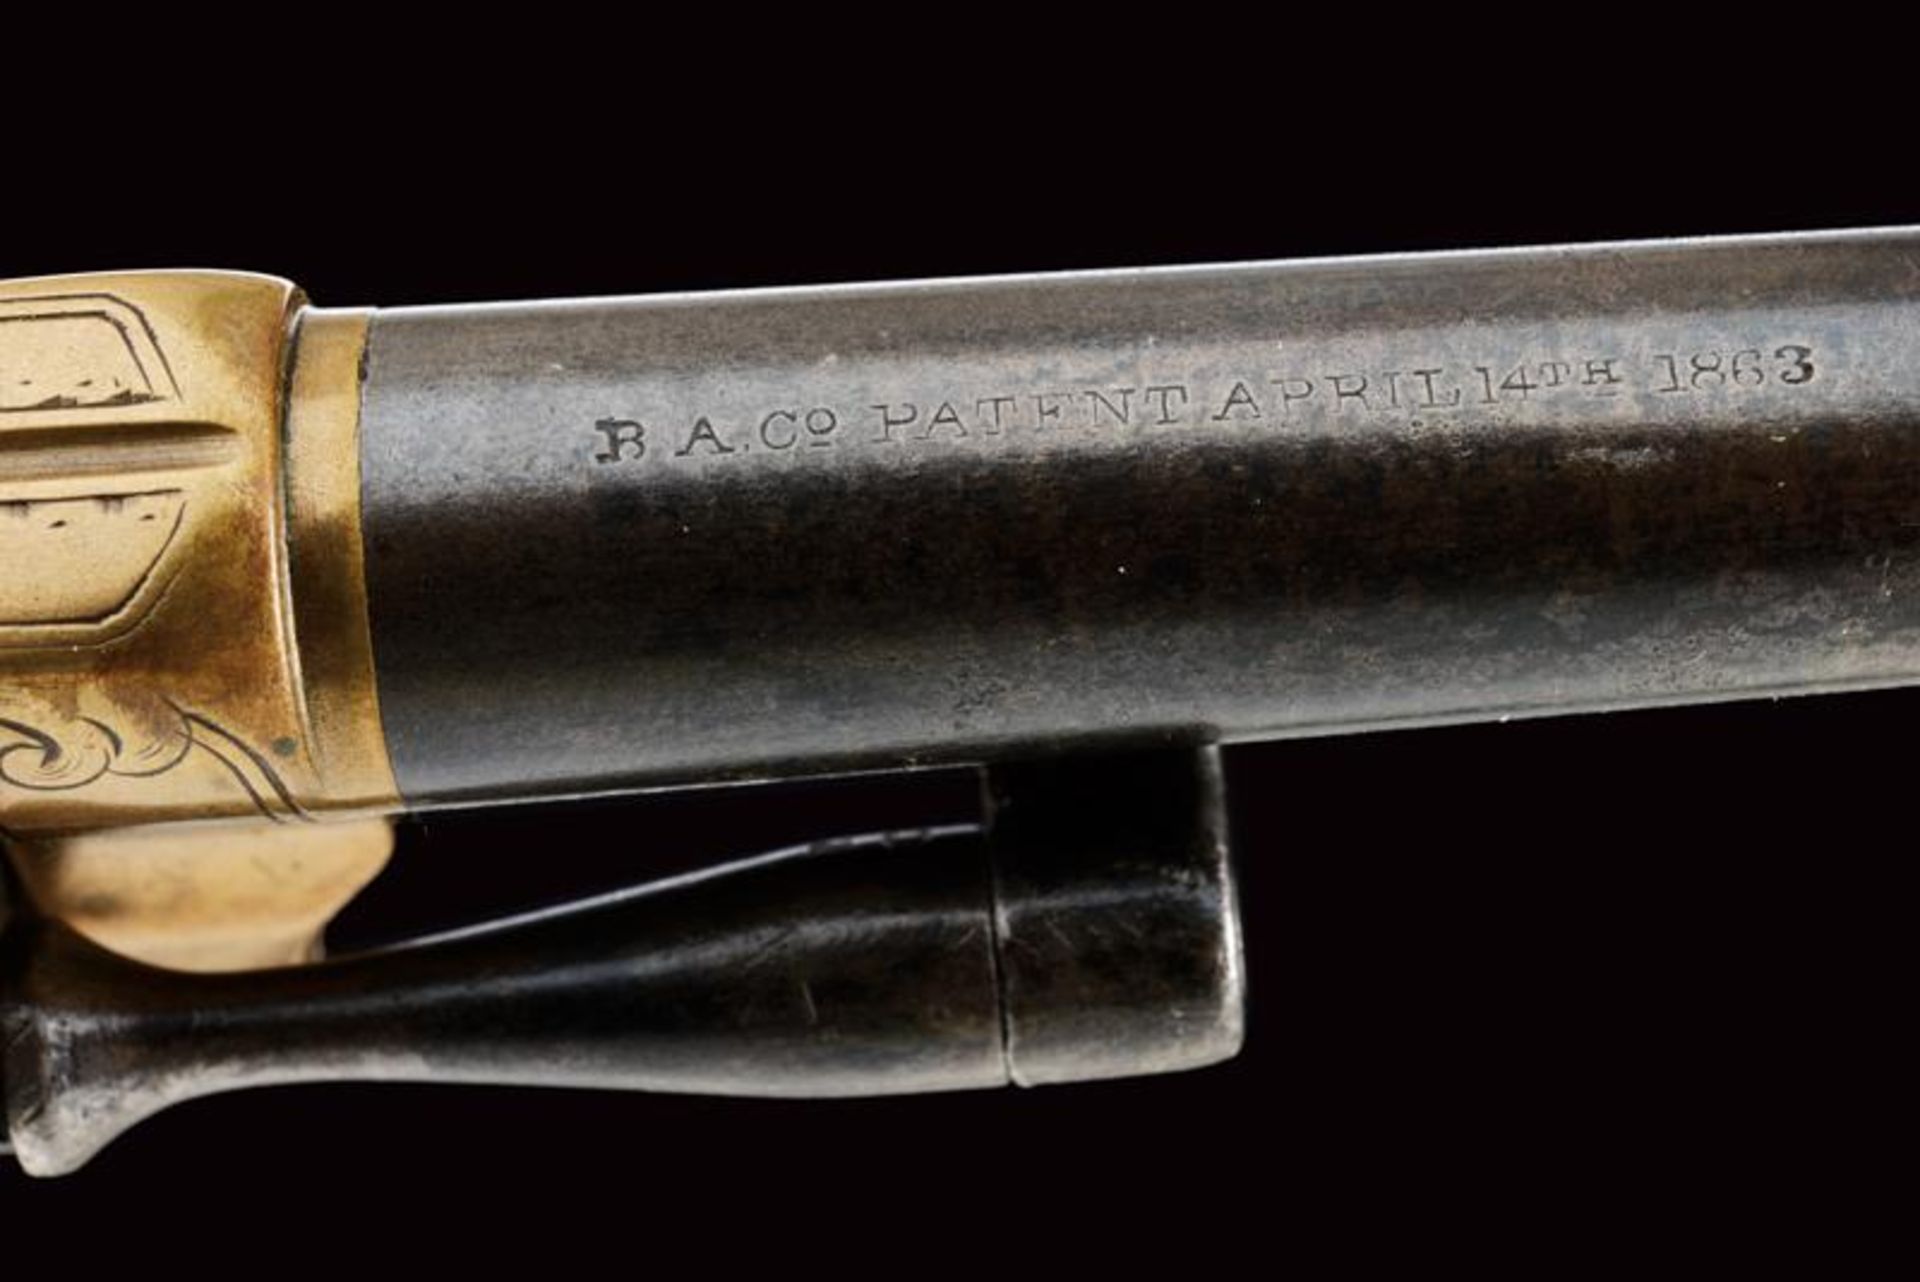 A Slocum Frontloading Pocket Revolver - Image 5 of 7